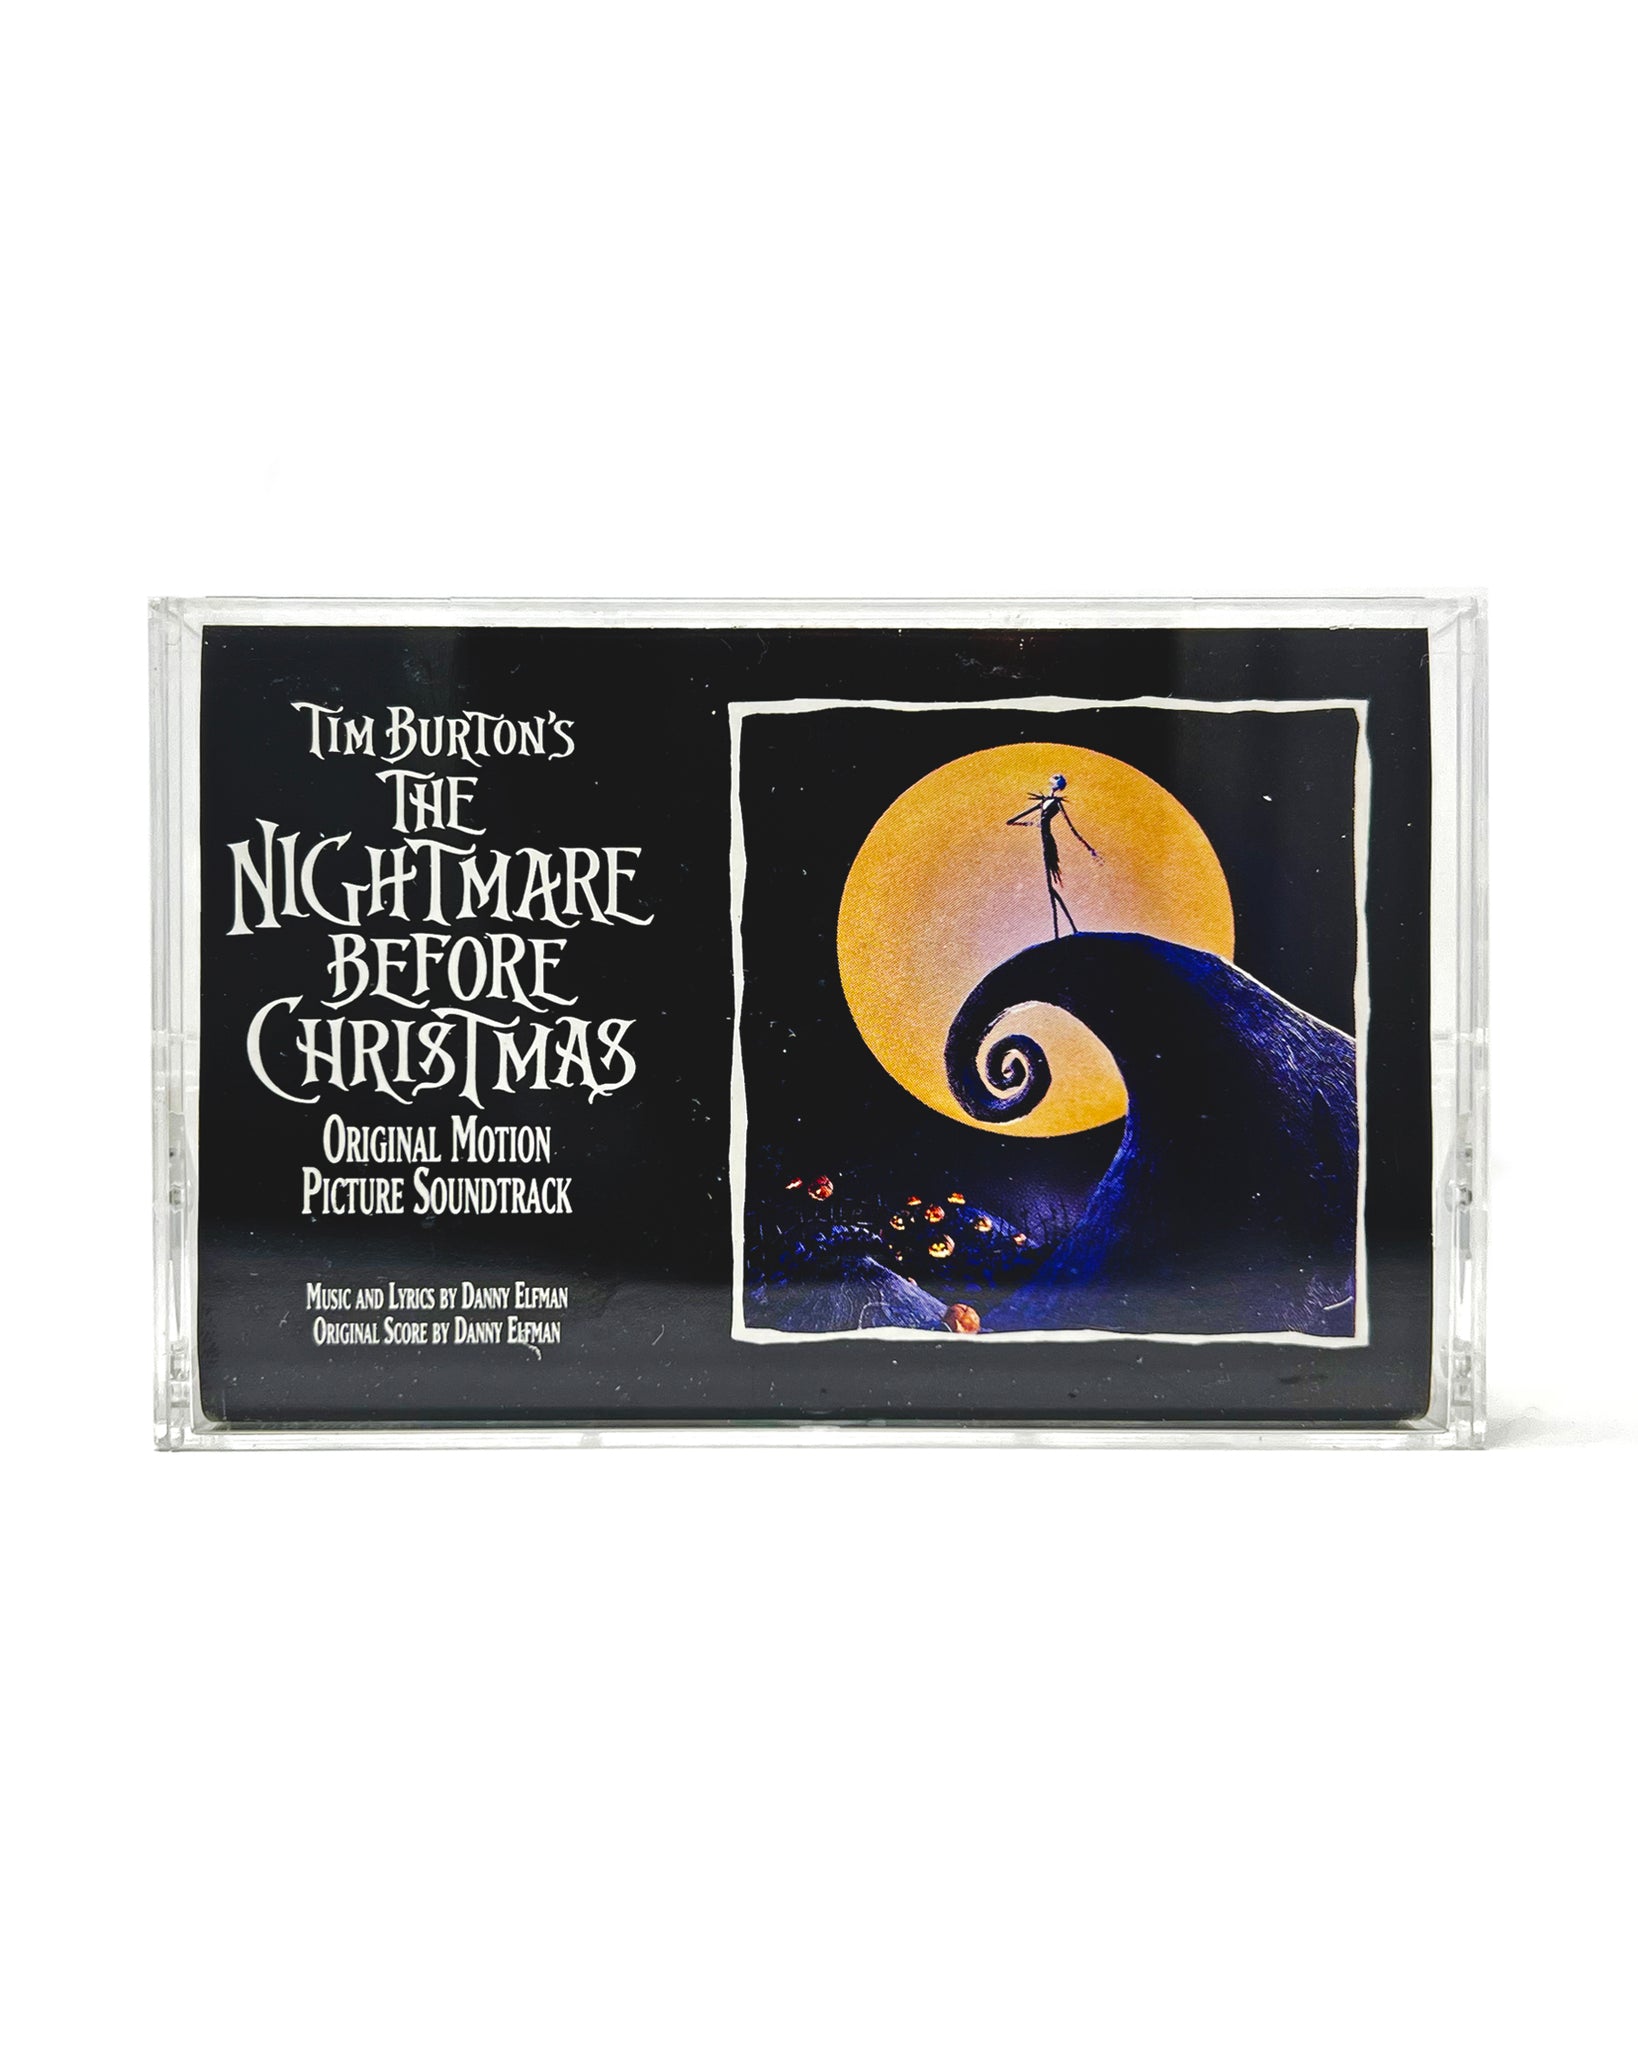 Vintage Holiday Cassette Tape: Tim Burton's "The Nightmare Before Christmas"